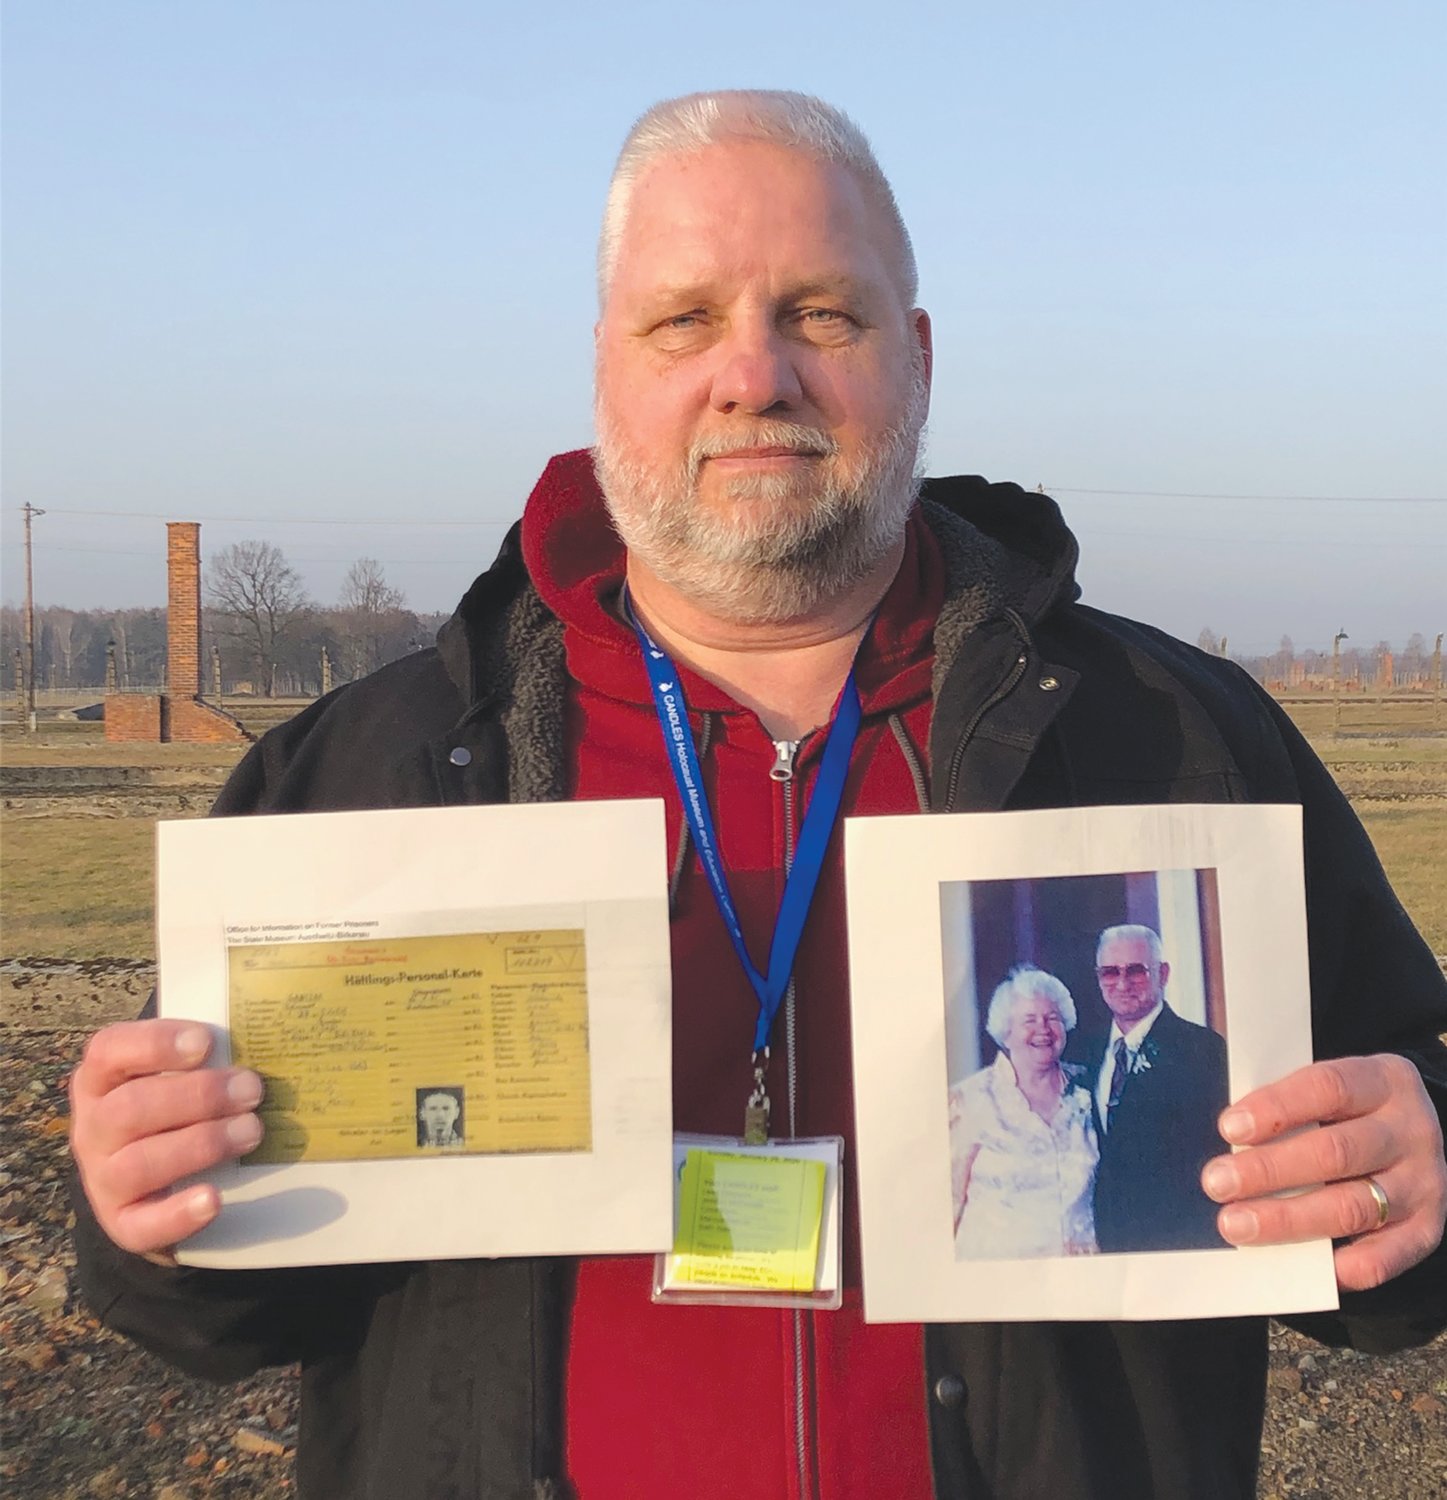 Tony Gonczarow, a Southmont High School teacher, holds his father’s record and a photograph of his parents during the 75th anniversary of the liberation of Auschwitz on Monday.